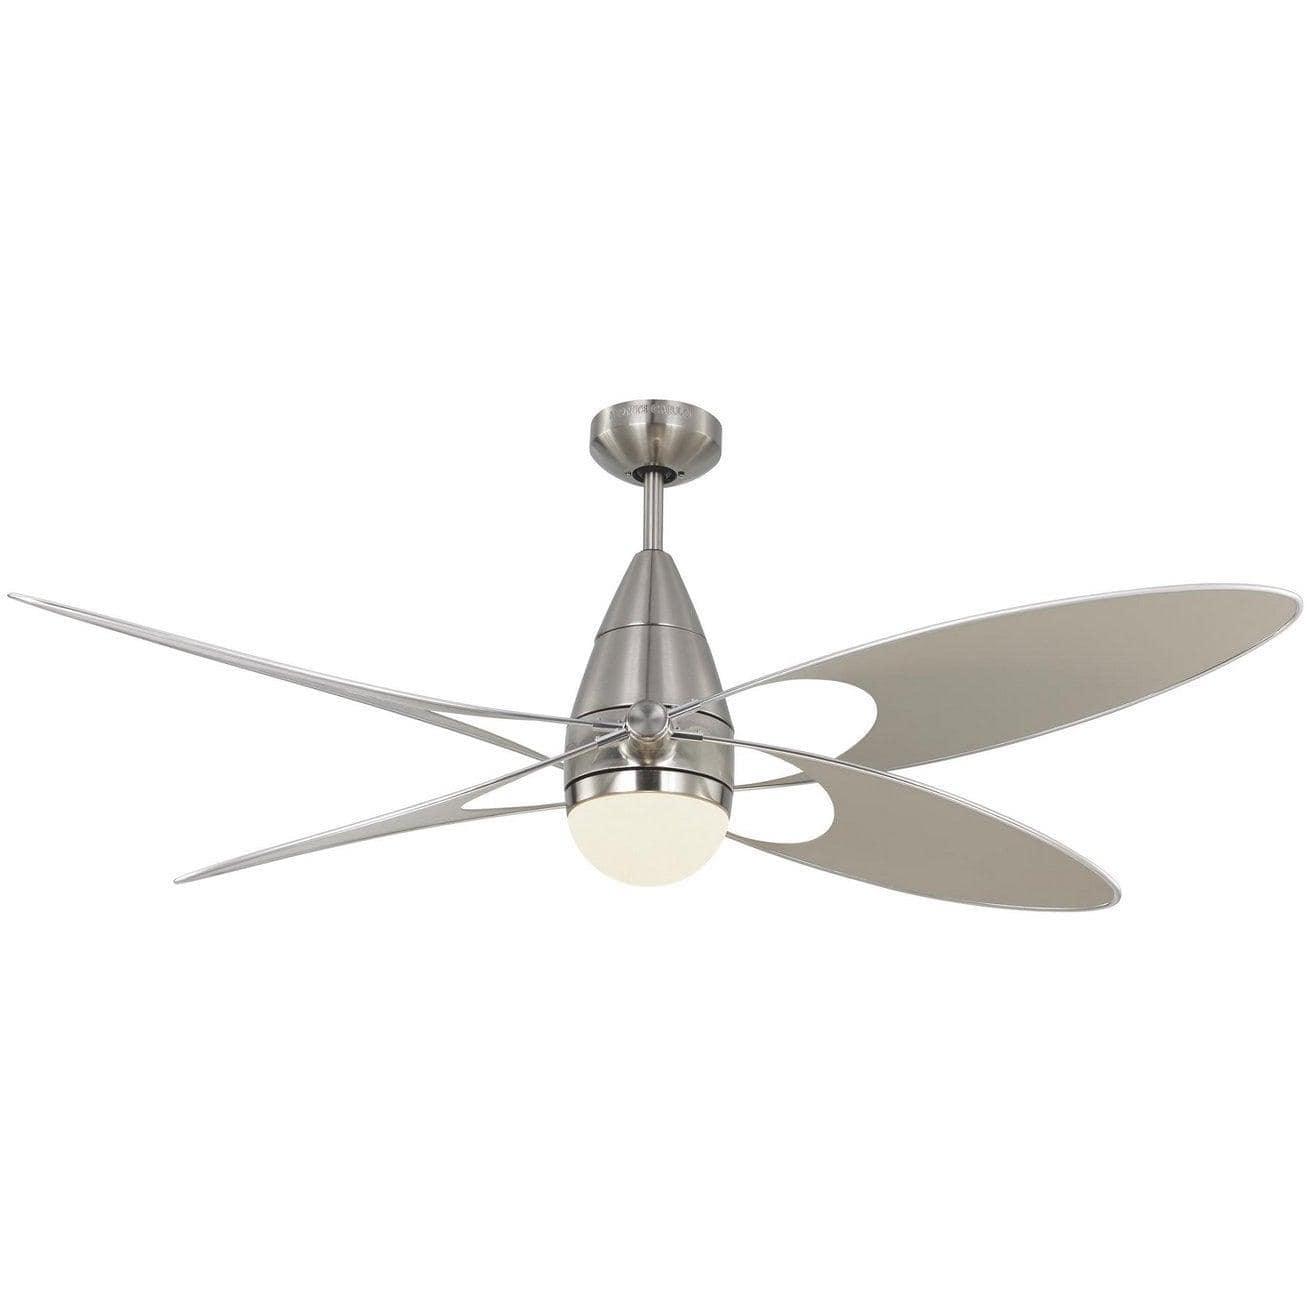 Visual Comfort Fan Collection - Butterfly 54" Ceiling Fan - 4BFR54BSD-V1 | Montreal Lighting & Hardware